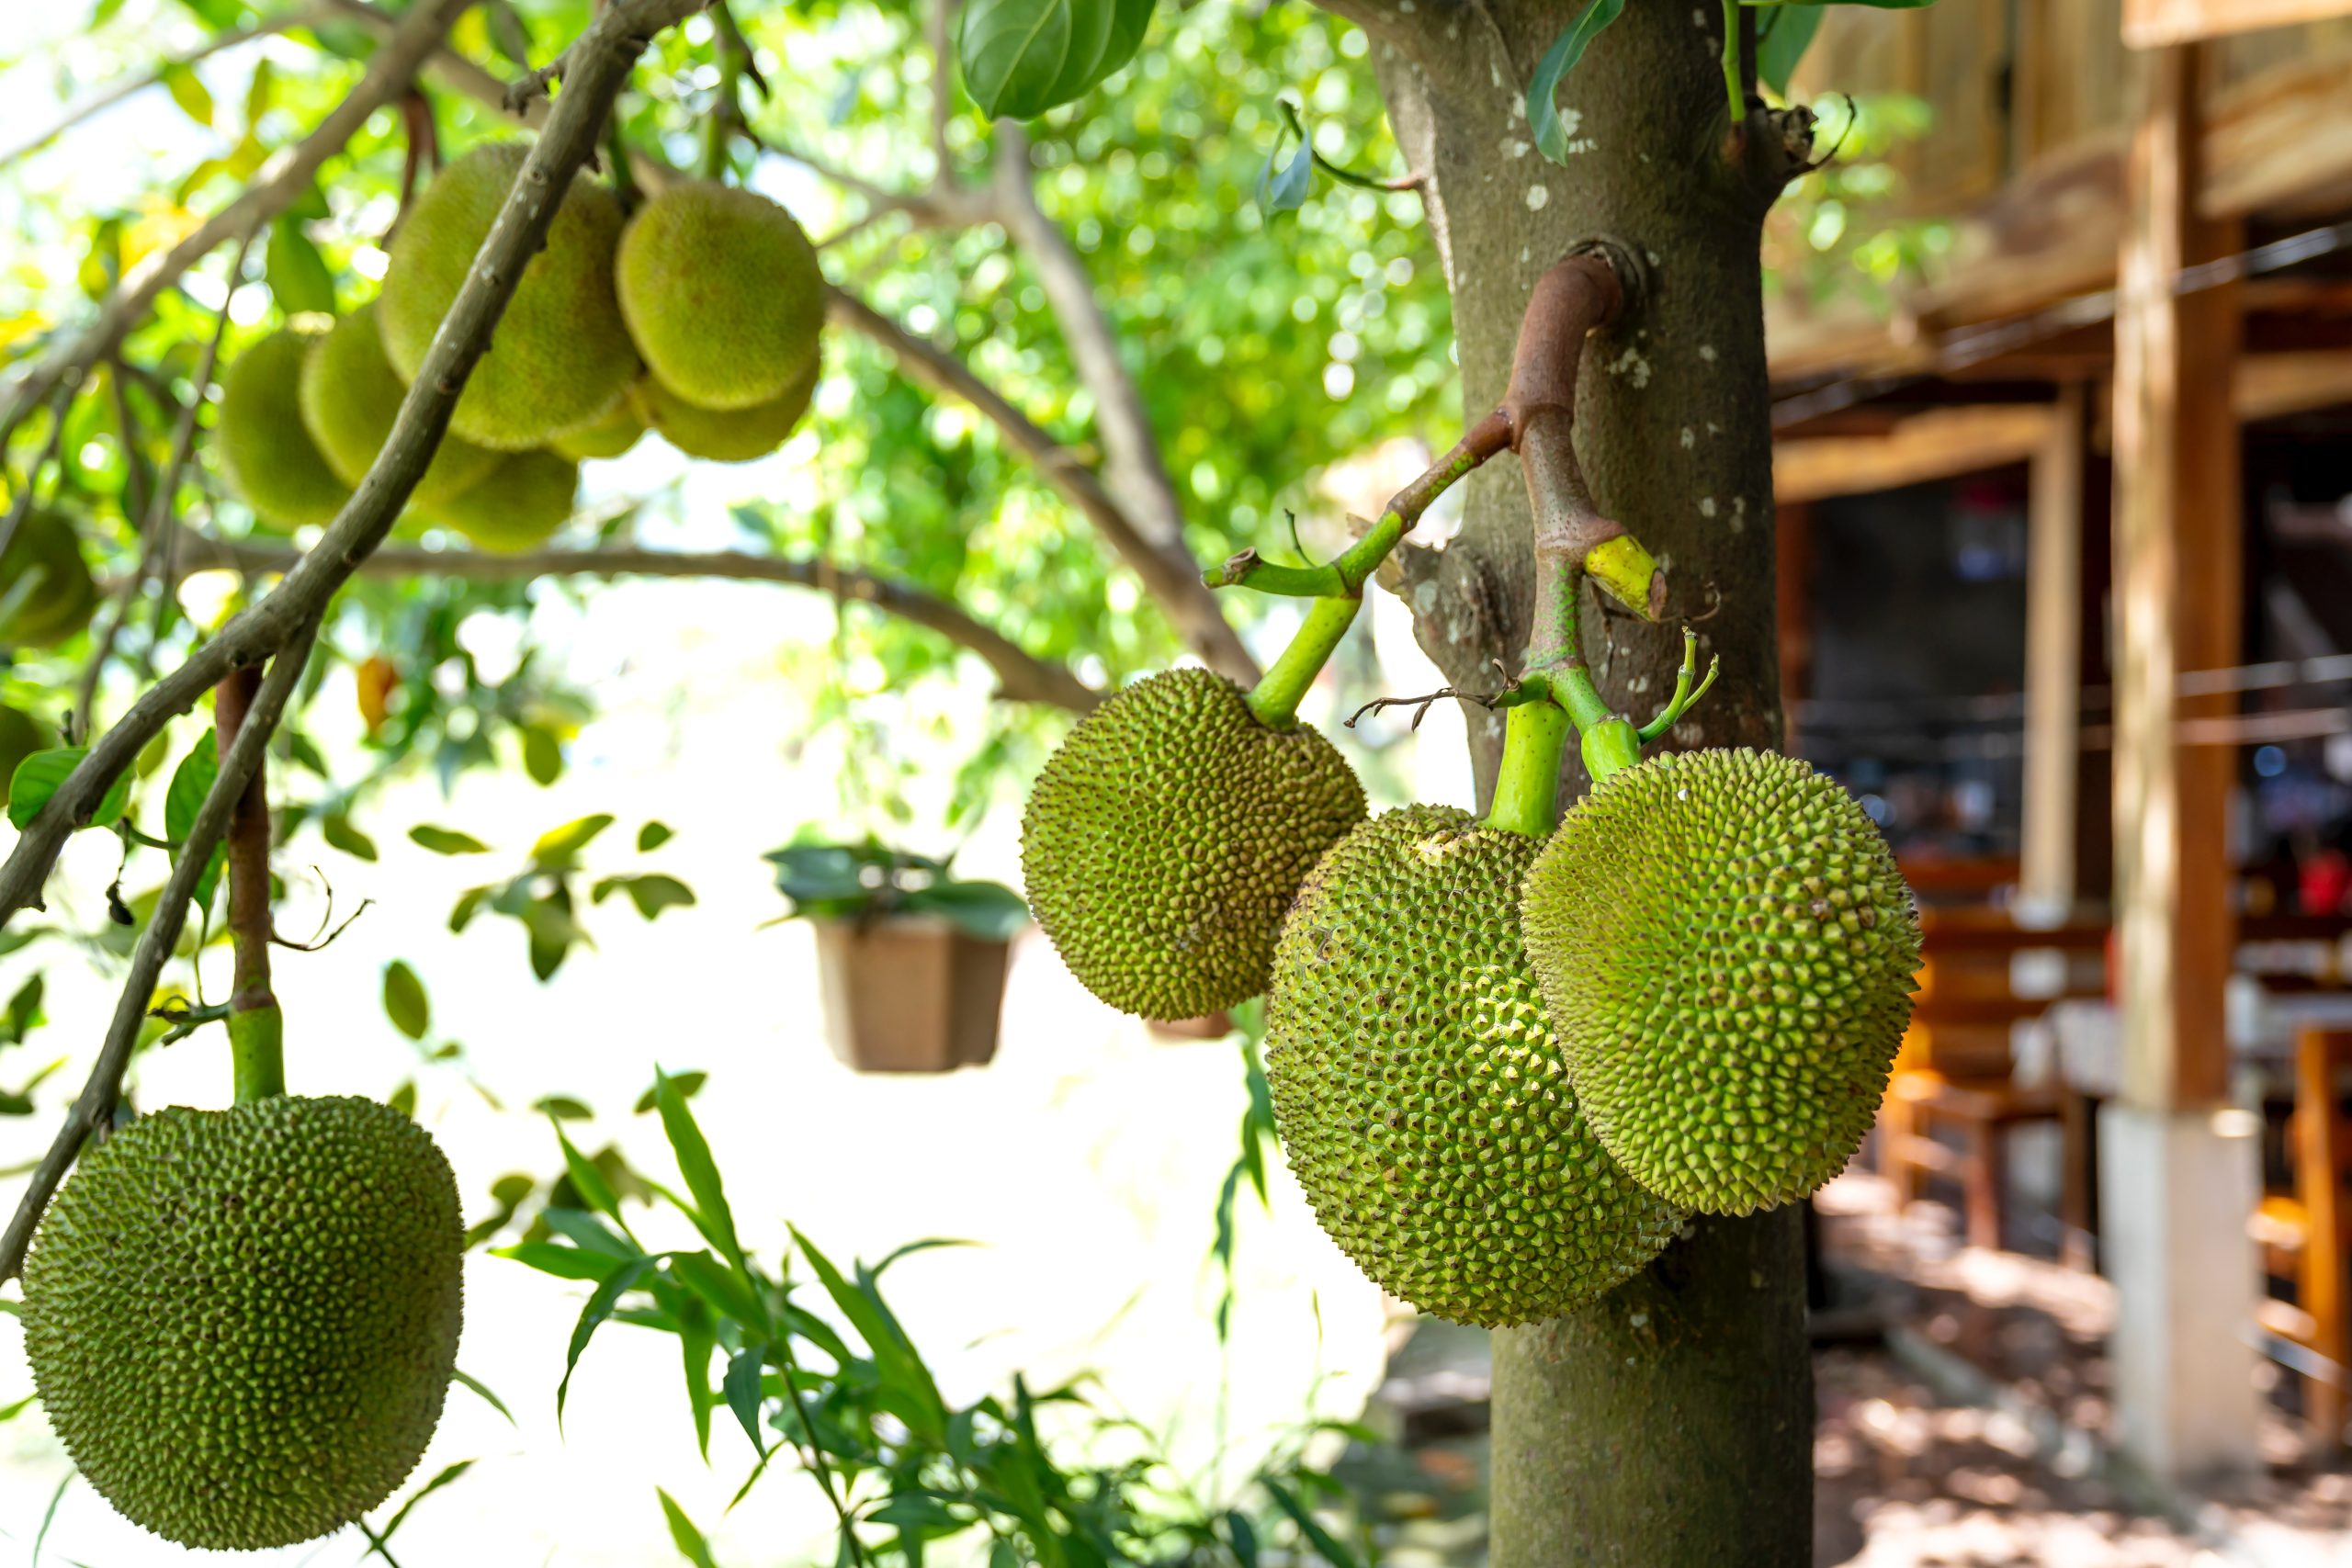 How to Grow a Jackfruit Tree From Seed